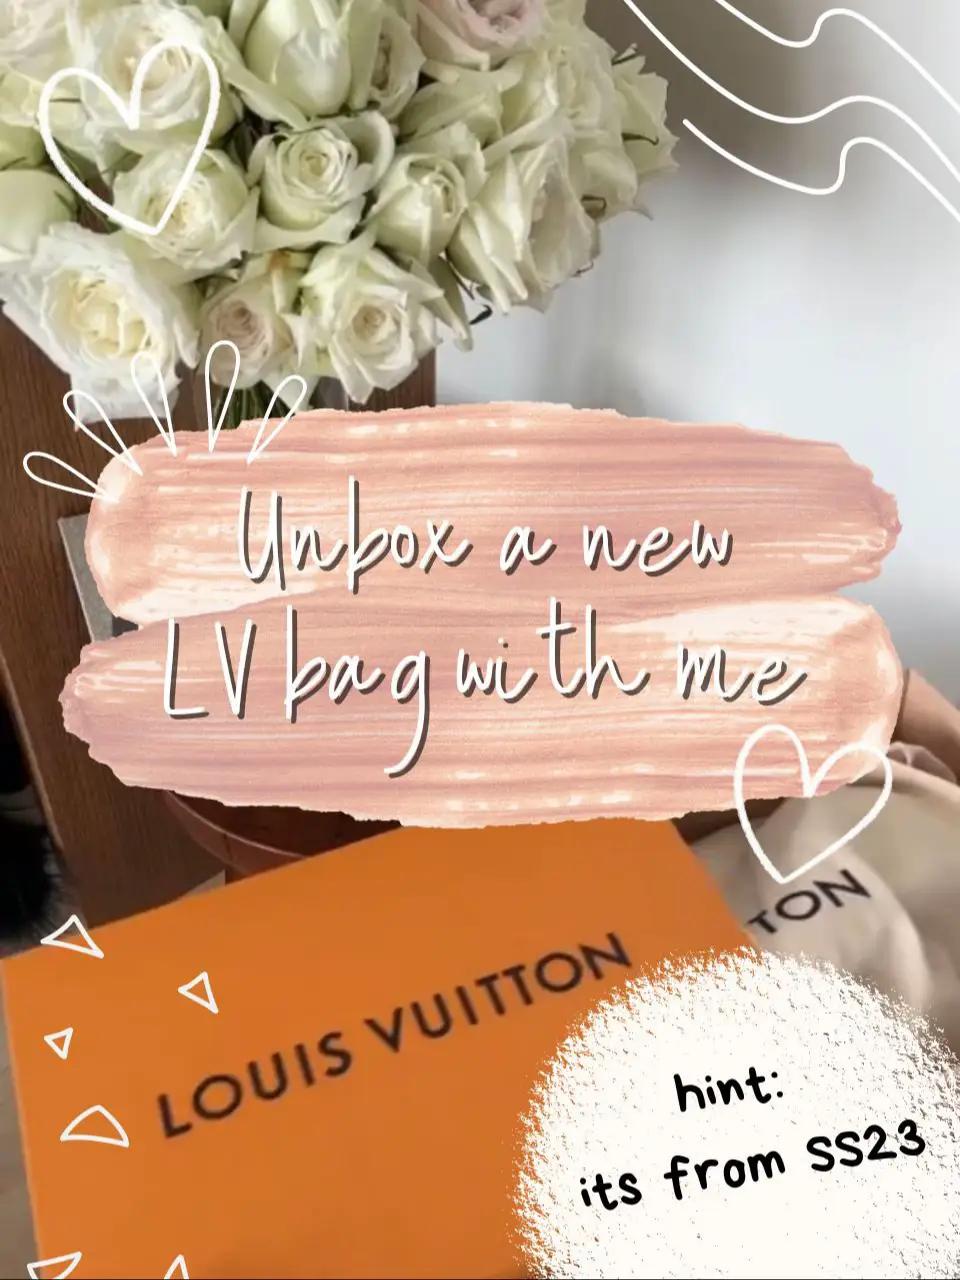 WHAT FITS IN THE SMALLEST MICRO LV BAG, Video published by Savi Chow